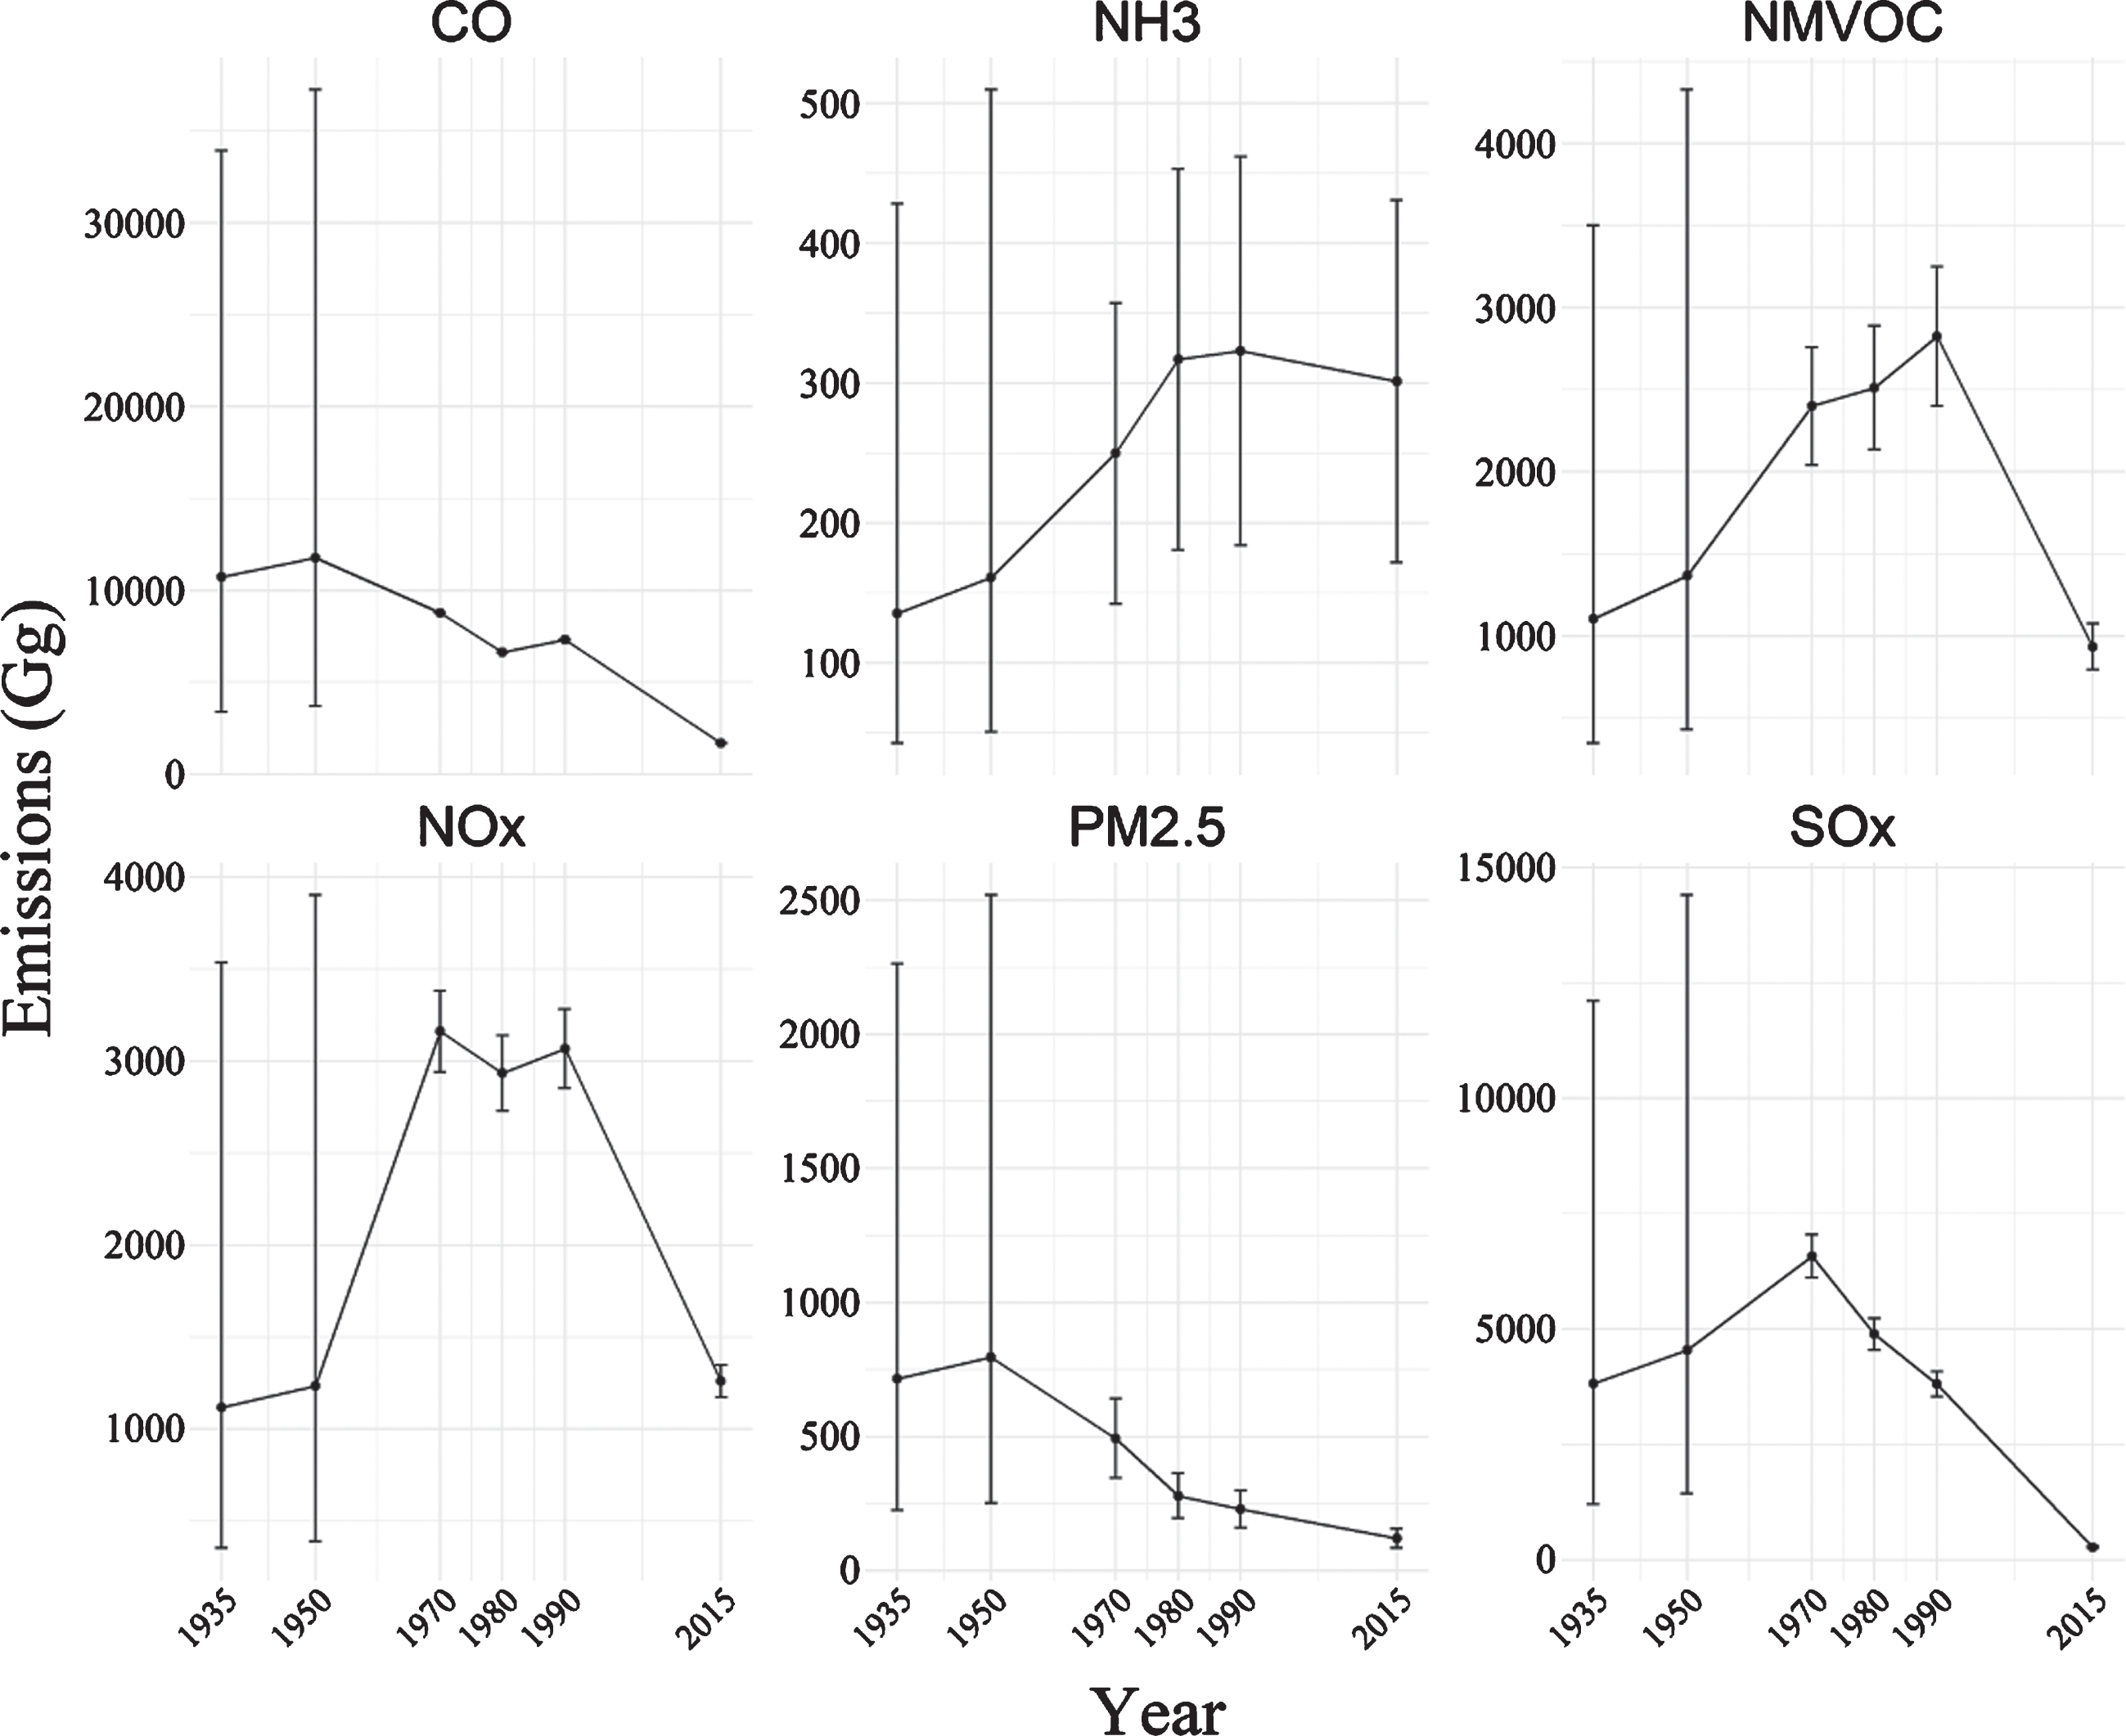 Modelled emission totals (Gg) with uncertainty ranges for five air pollutants (CO, NH3, NMVOCs, NOx, and SOx), plus PM2.5, across five model years (2015 is included for context) for use in the EMEP4UK model: life course air pollution exposure and cognitive decline in the LBC1936.